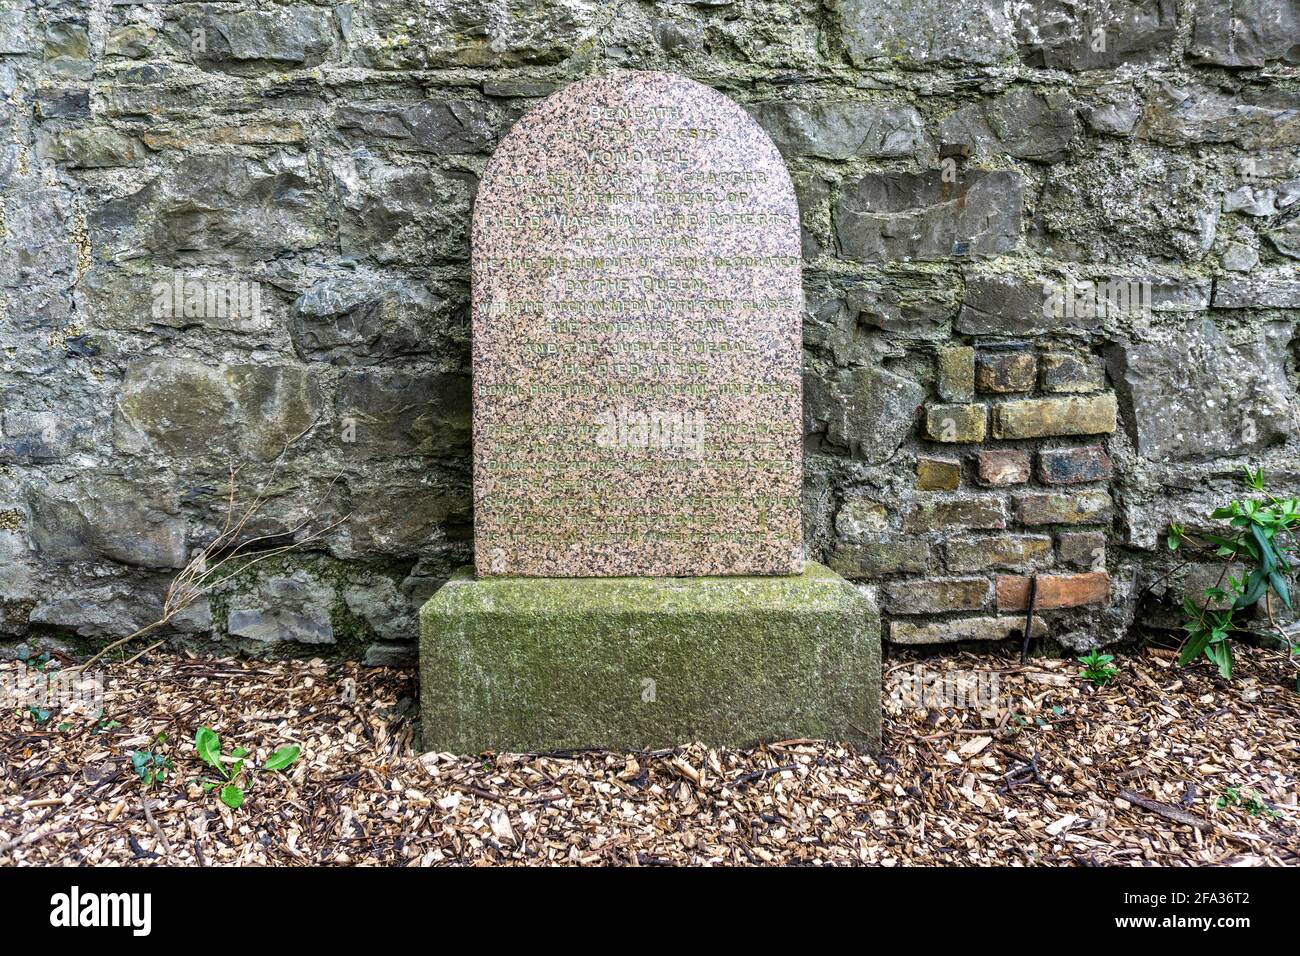 The resting place of Volonel, for 25 years the faithful charger of Field Marshal Lord Roberts of Kandahar, in the Royal Hospital, Kilmainham. Dublin. Stock Photo